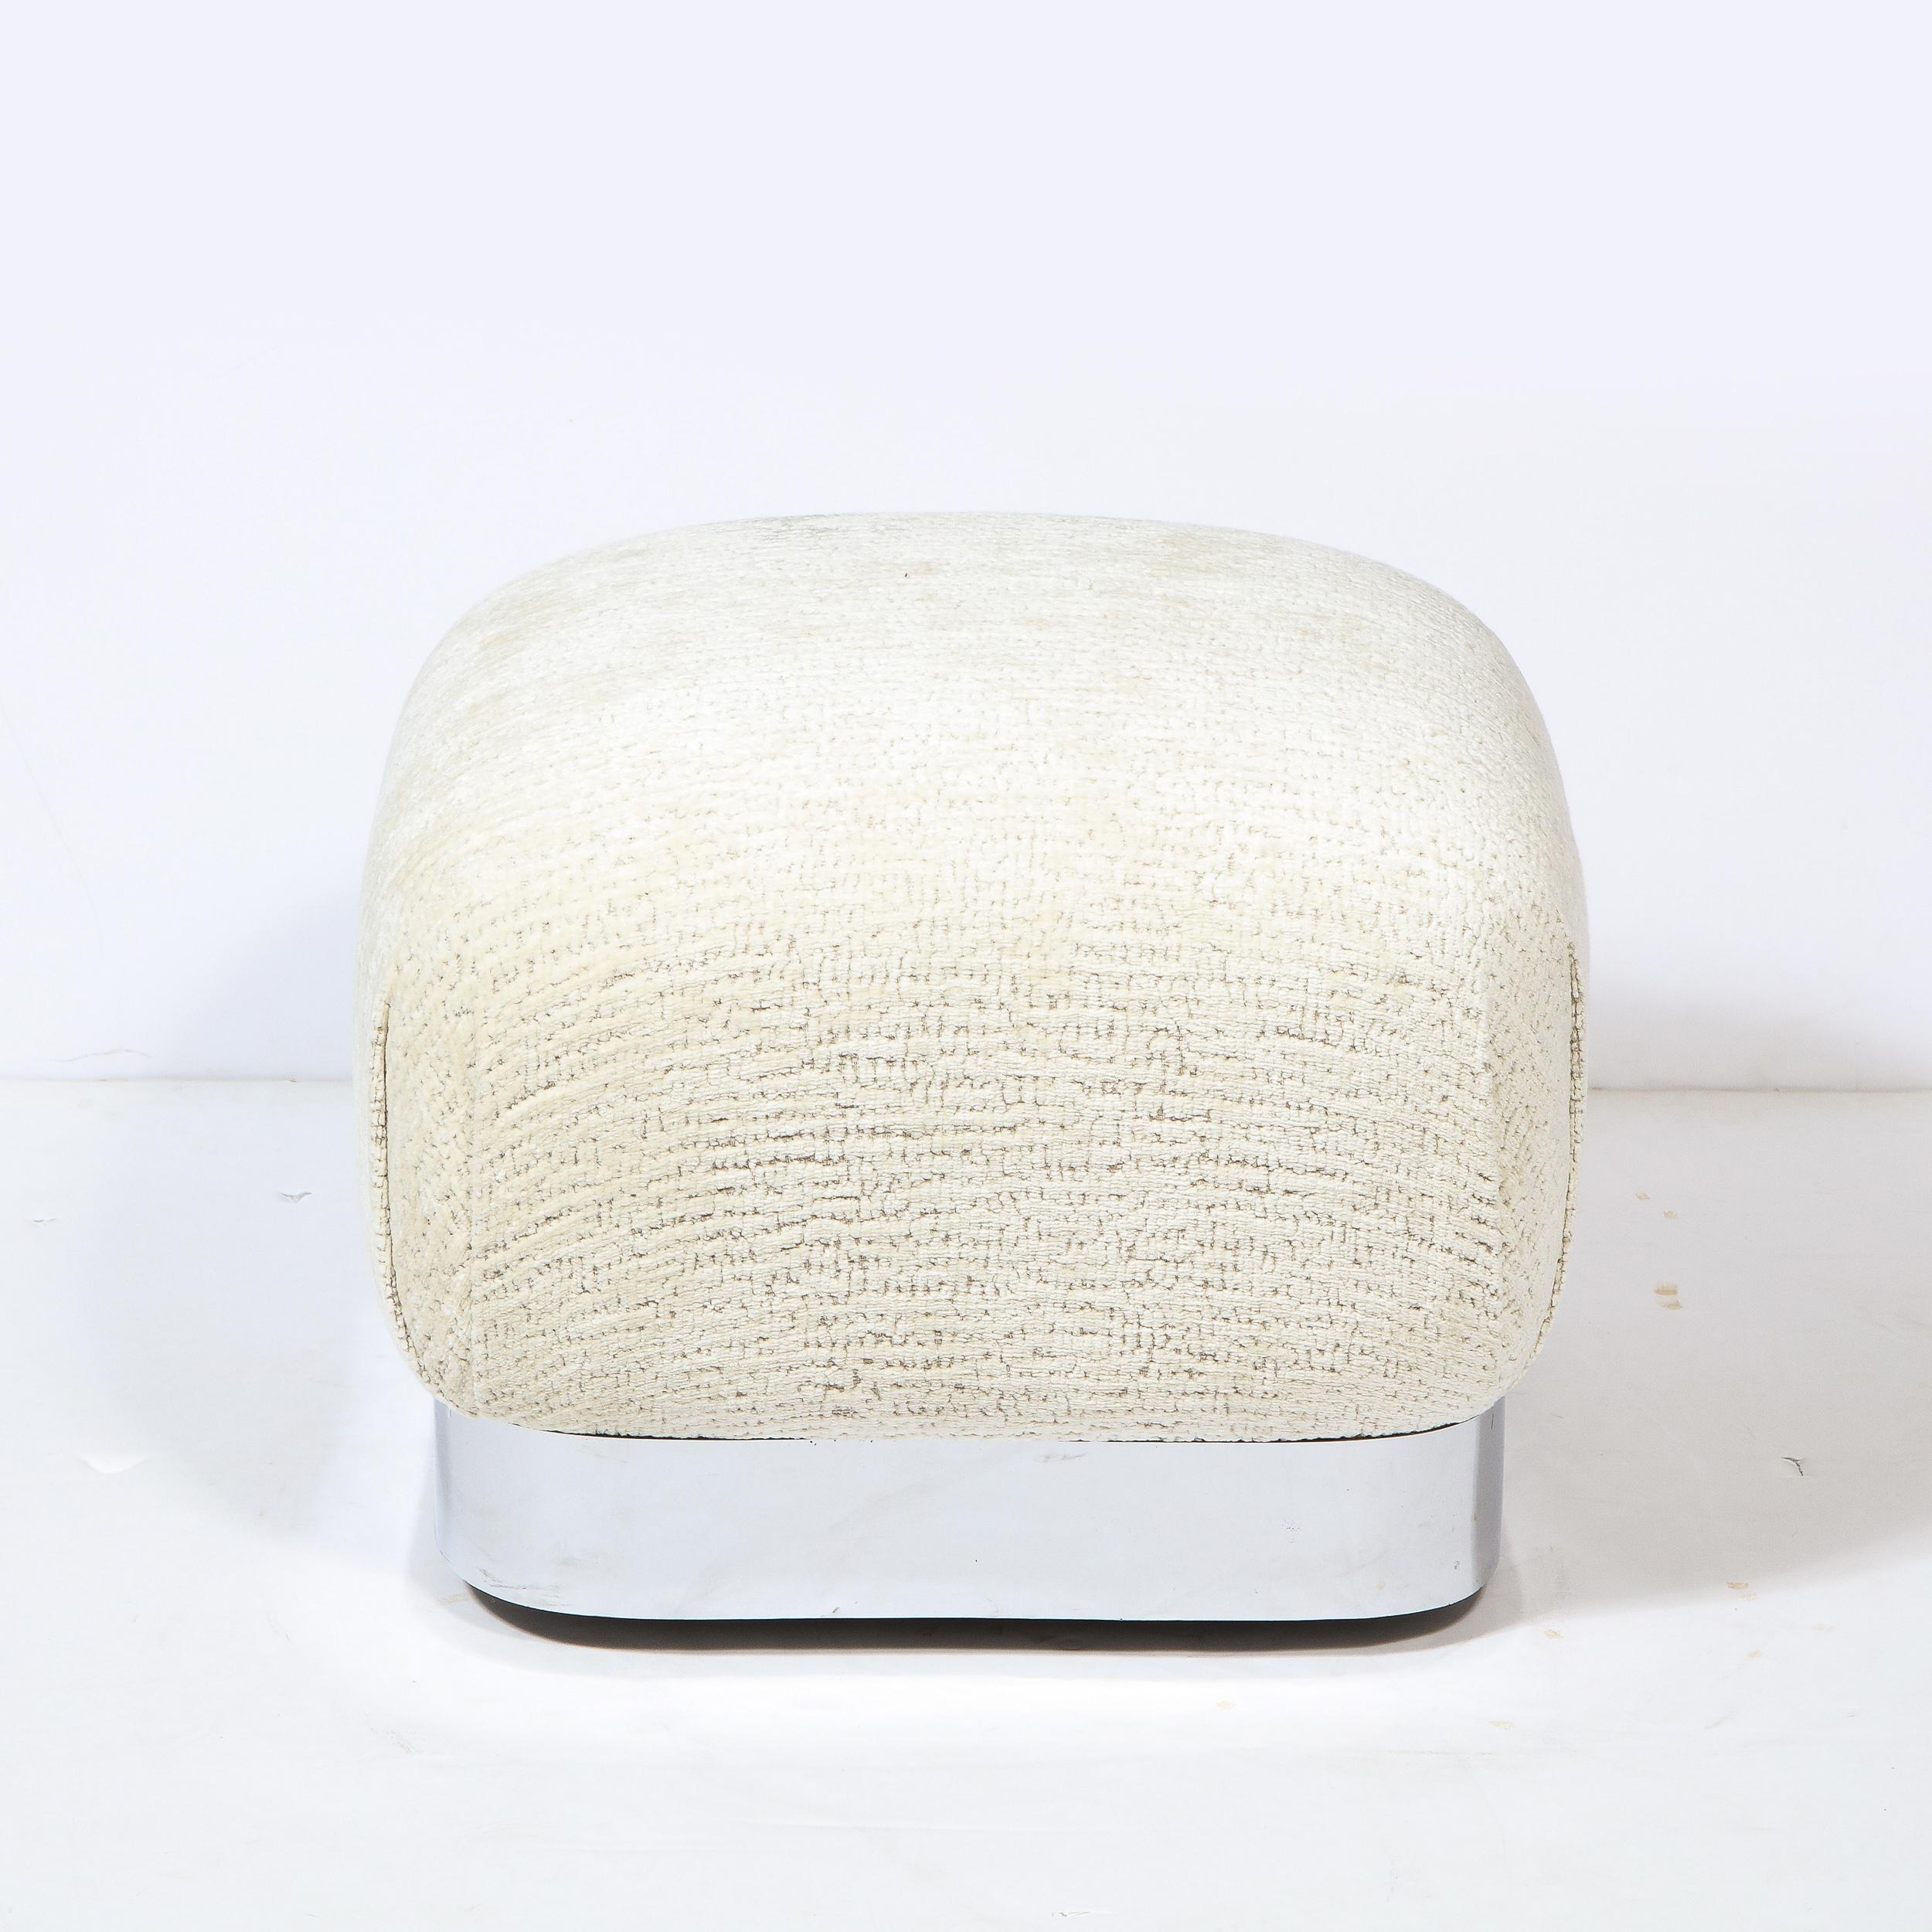 This stunning modernist ottoman was realized in the United States circa 1970. Executed in the manner of Karl Springer, it features a subtly domed concave body newly reupholstered in a luxurious cream gauffraged velvet. The base is wrapped wrapped in